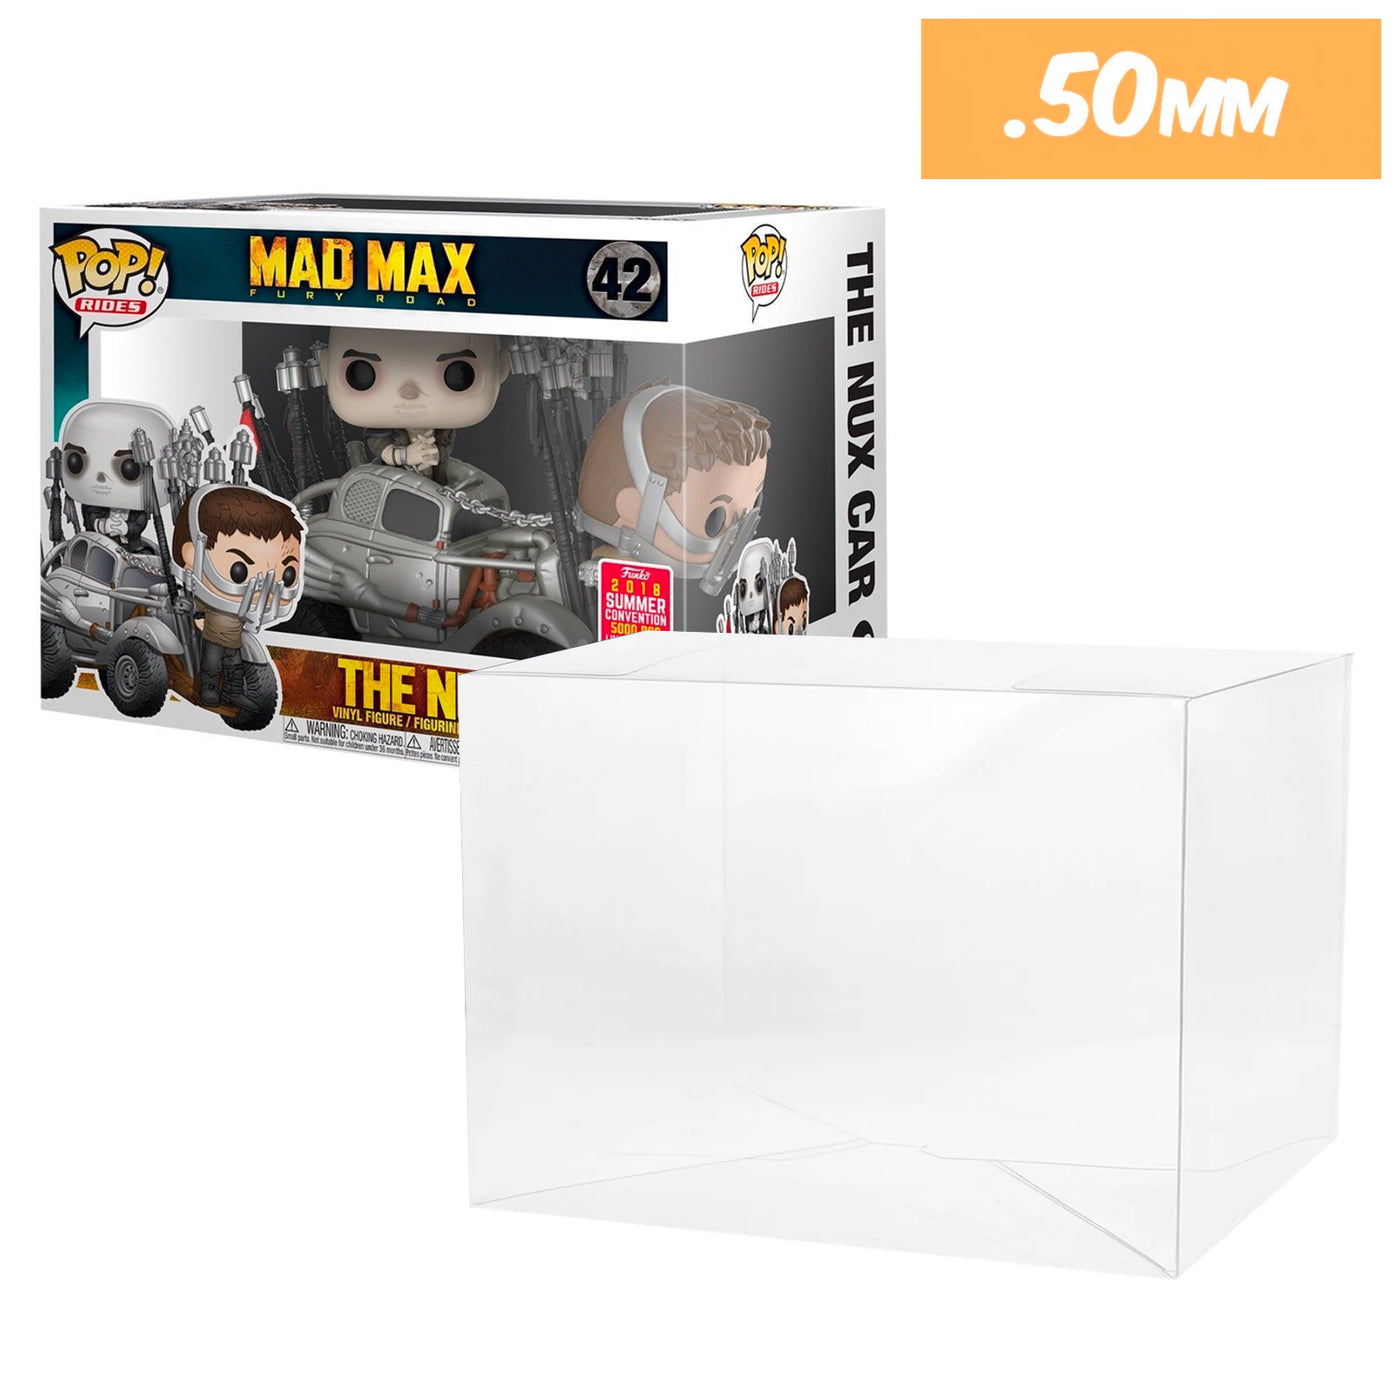 mad max the nux car pop rides best funko pop protectors thick strong uv scratch flat top stack vinyl display geek plastic shield vaulted eco armor fits collect protect display case kollector protector